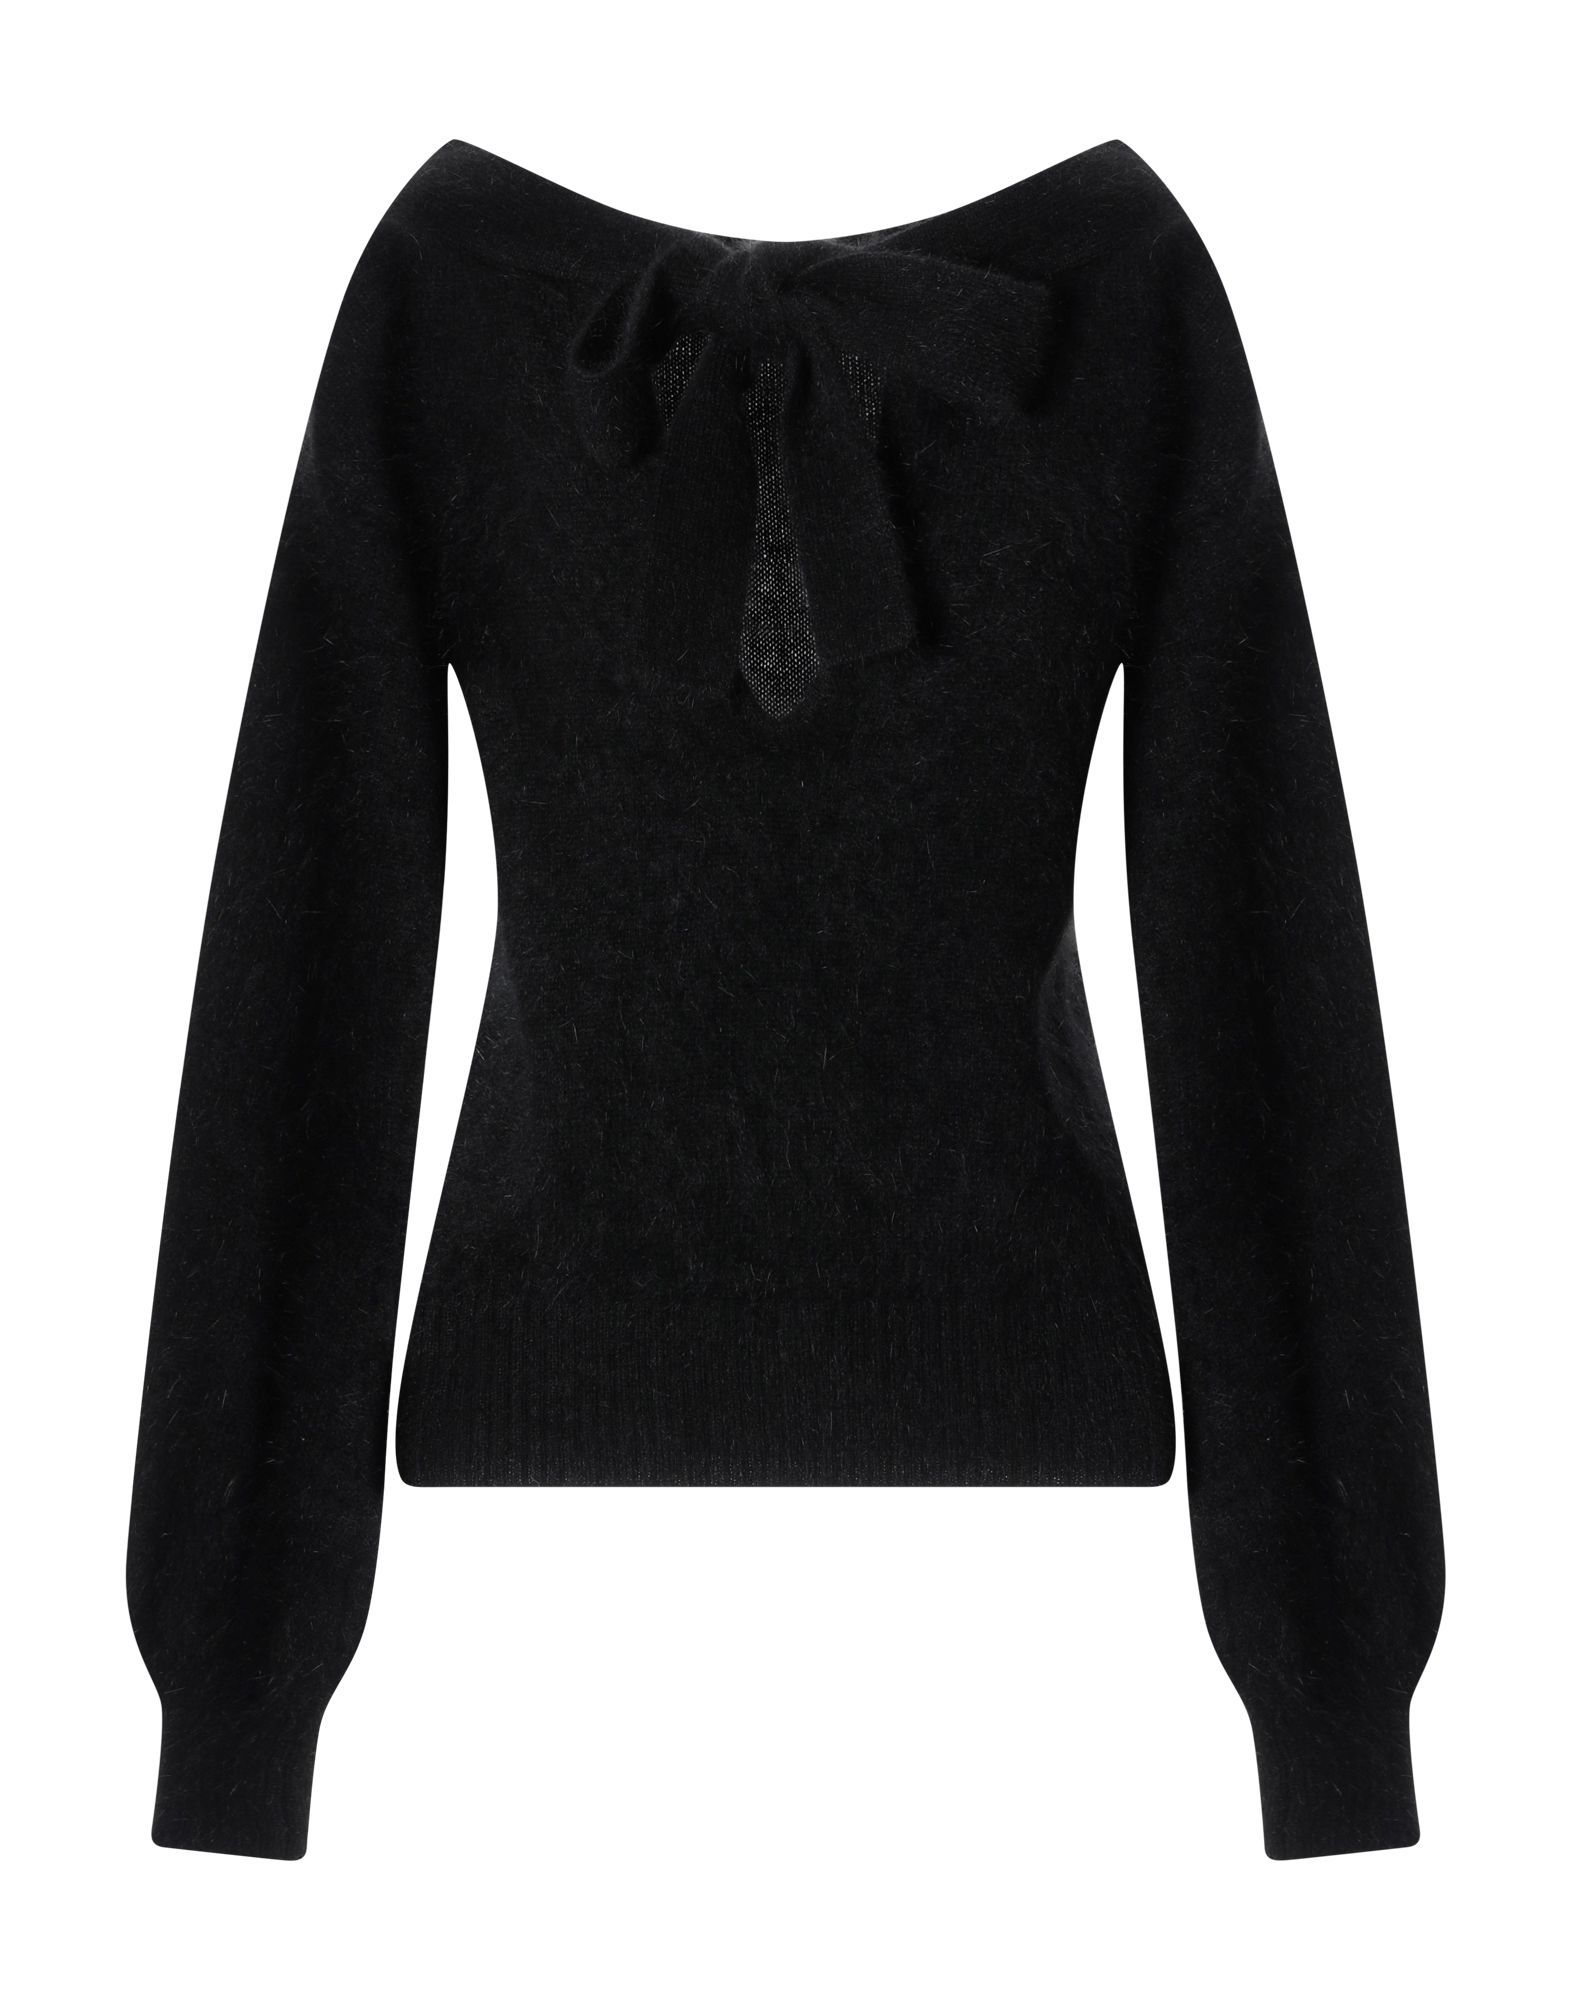 velour, knitted, no appliqu�s, basic solid colour, bow collar, heavy-weight knitted, long sleeves, no pockets